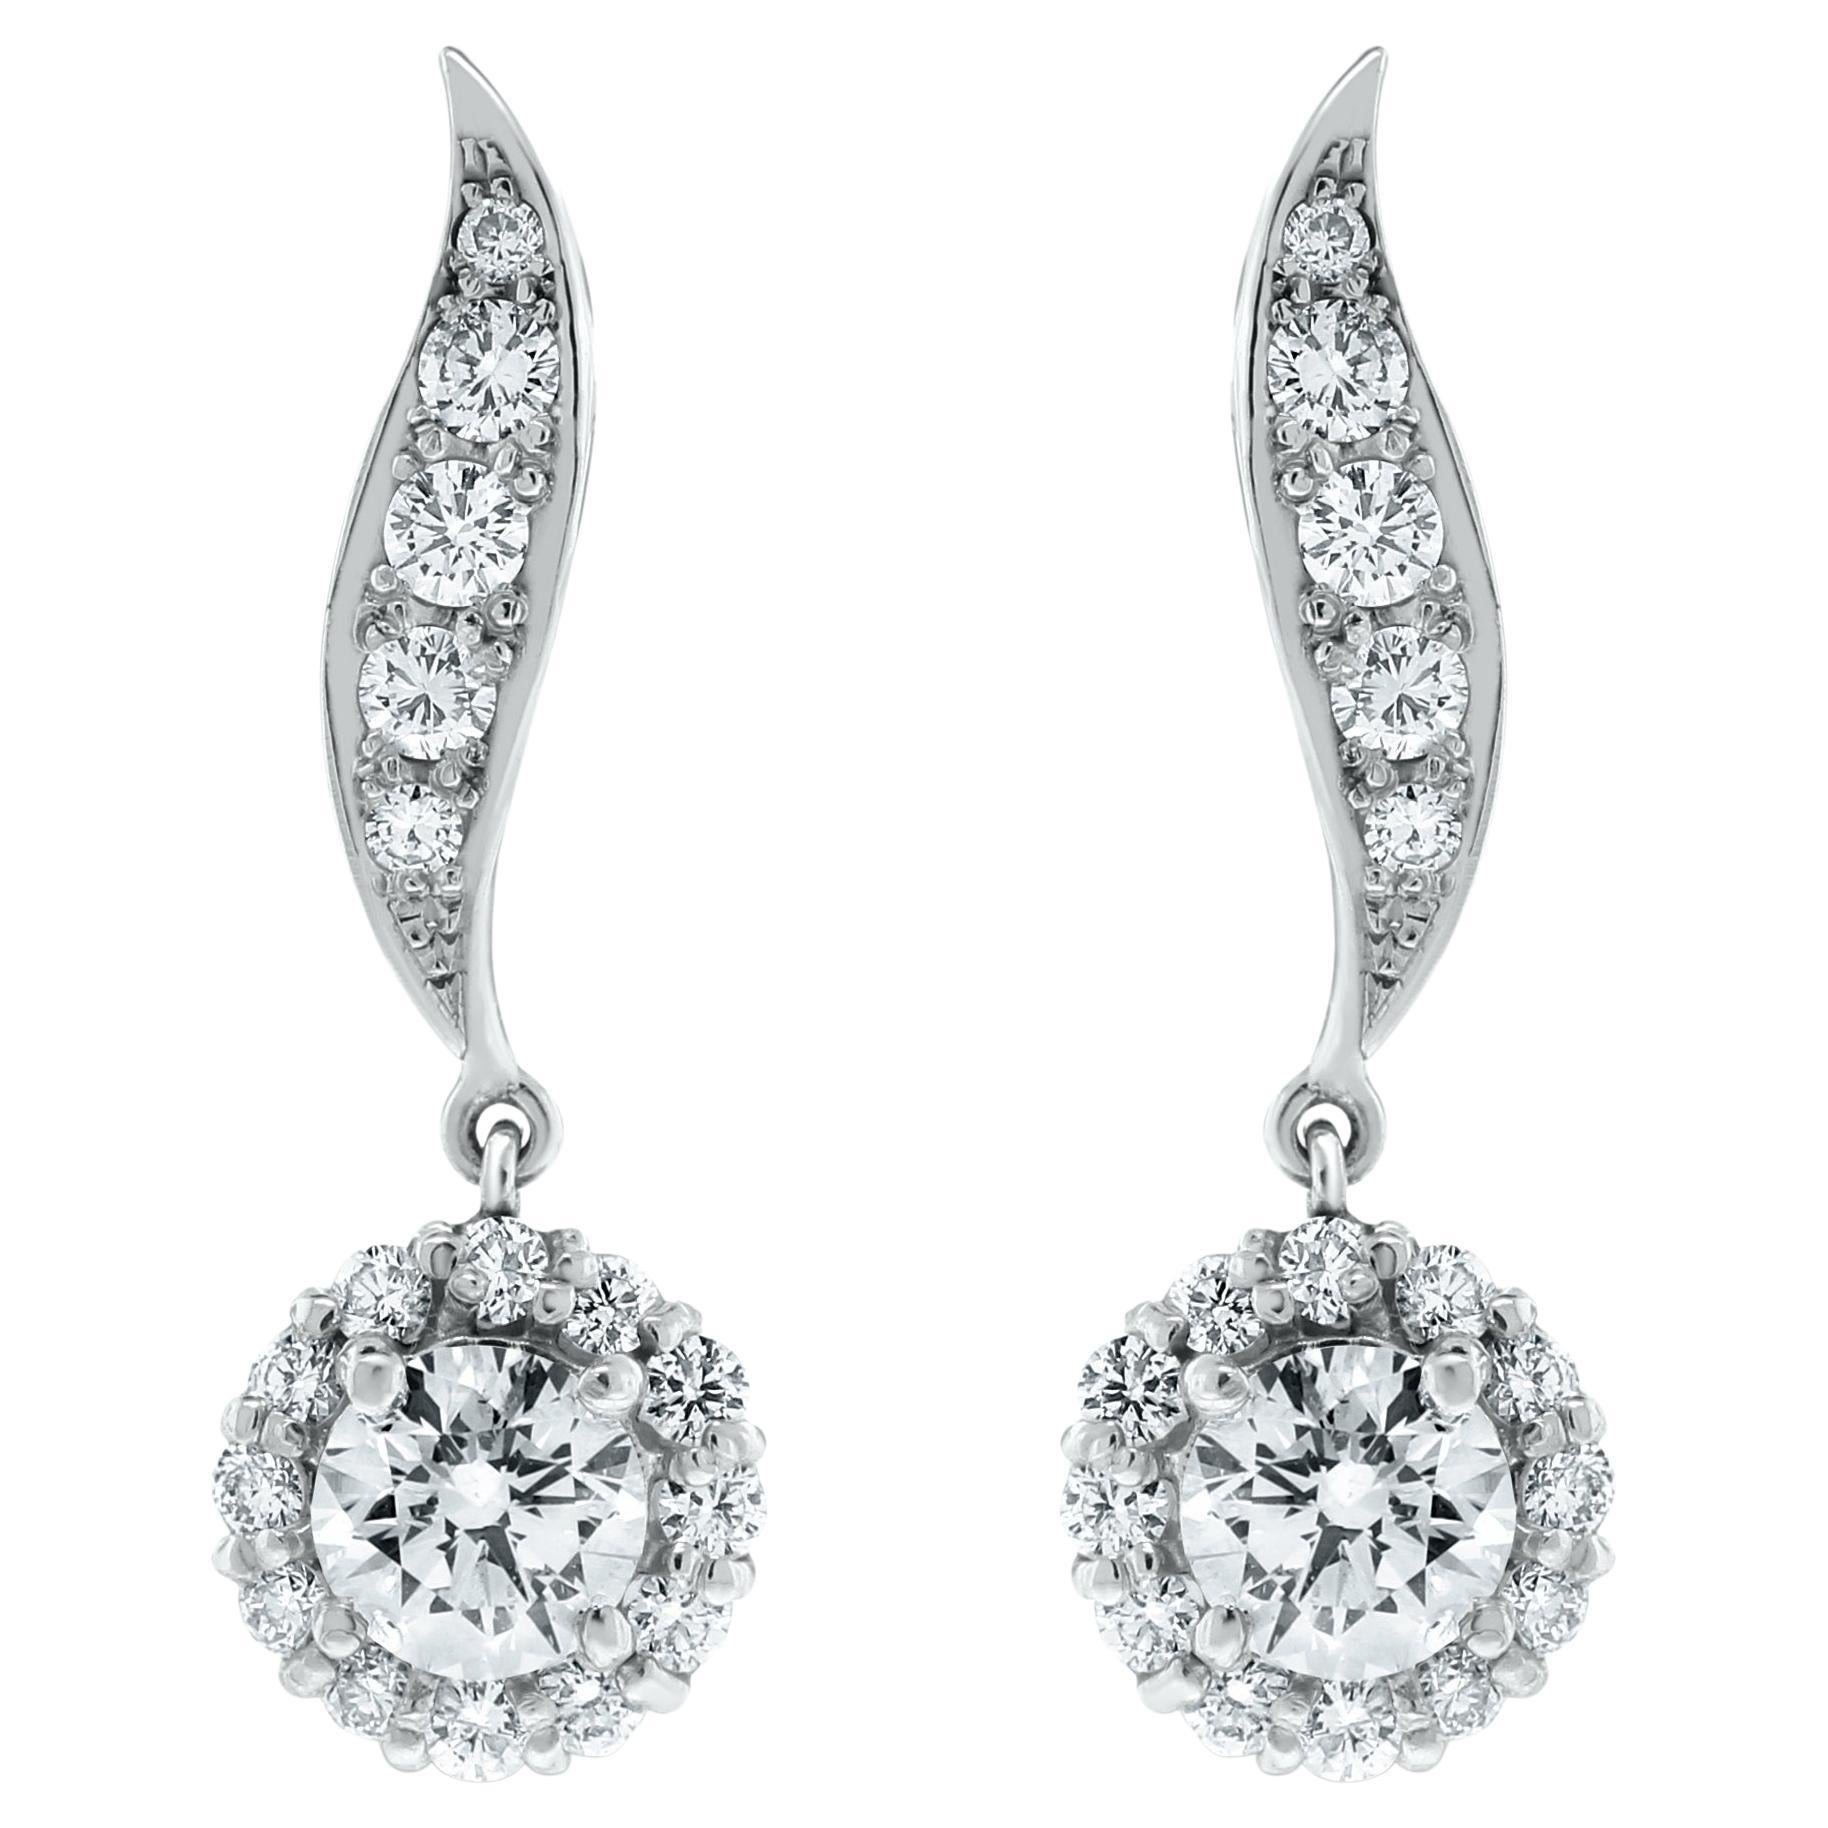 Beauvince Leela Leaf Drop Earrings, '3.50 Ct Diamonds', in White Gold For Sale